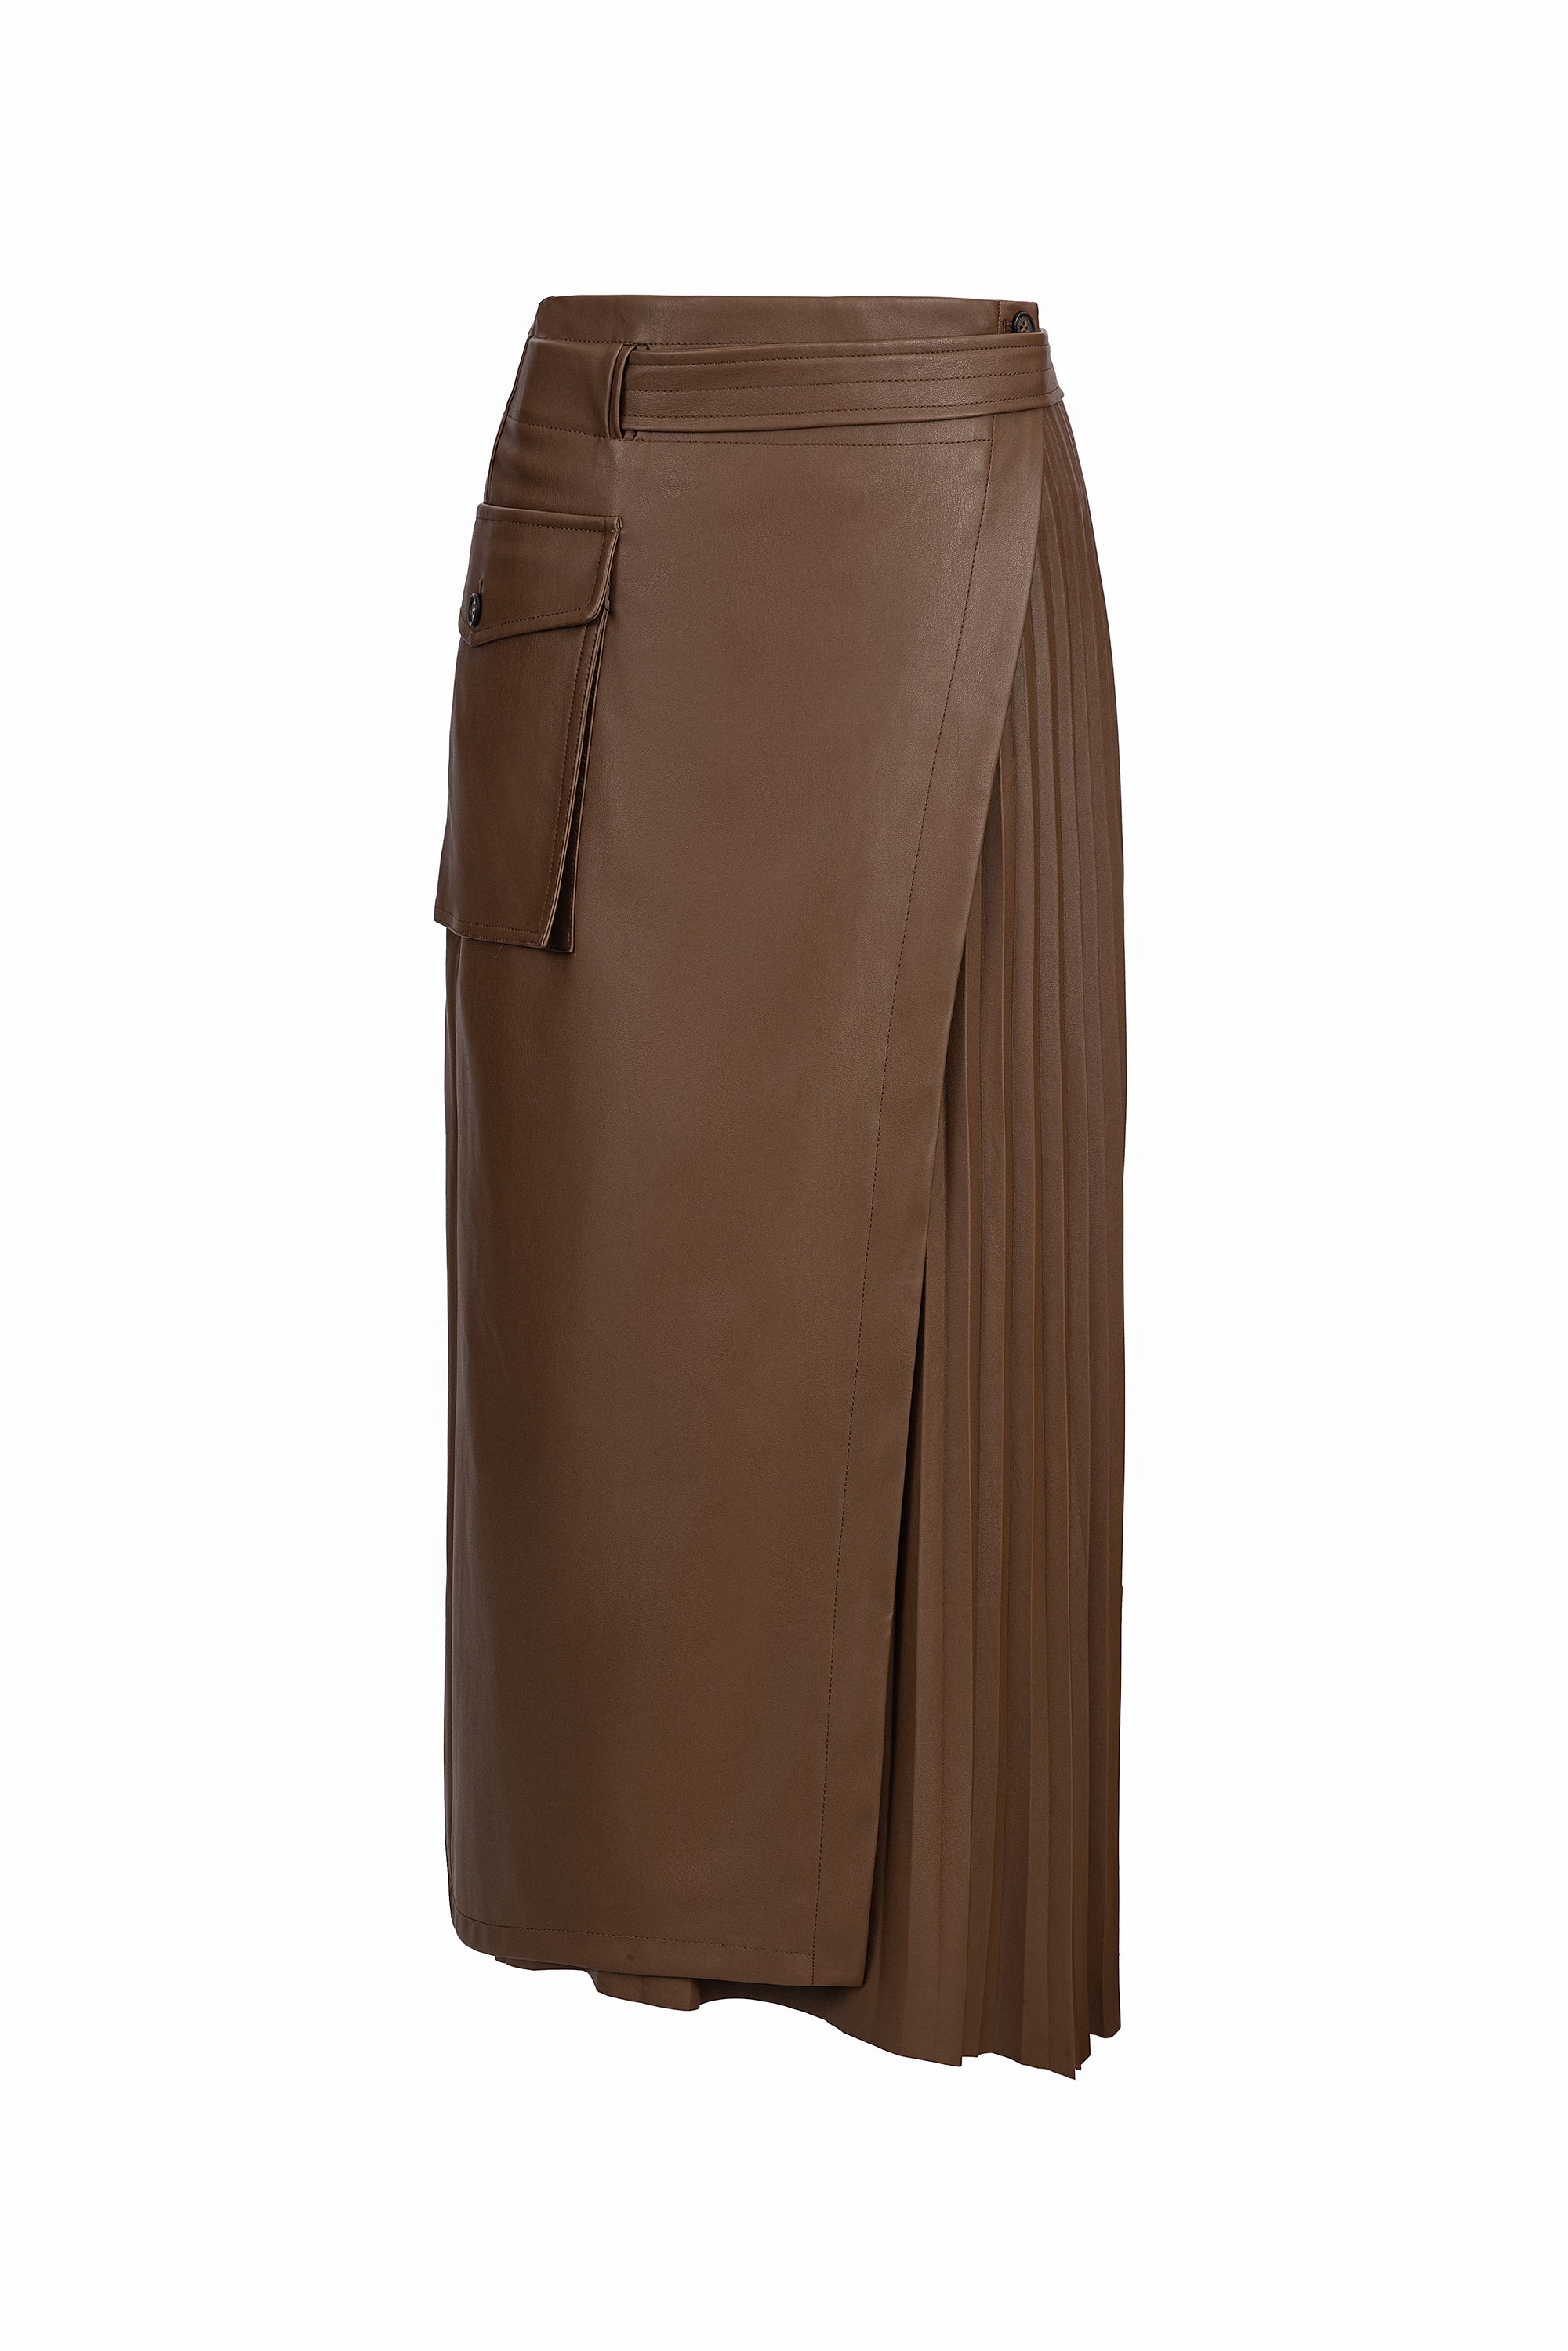 Faux Leather Skirt in Nut – Urbancode London